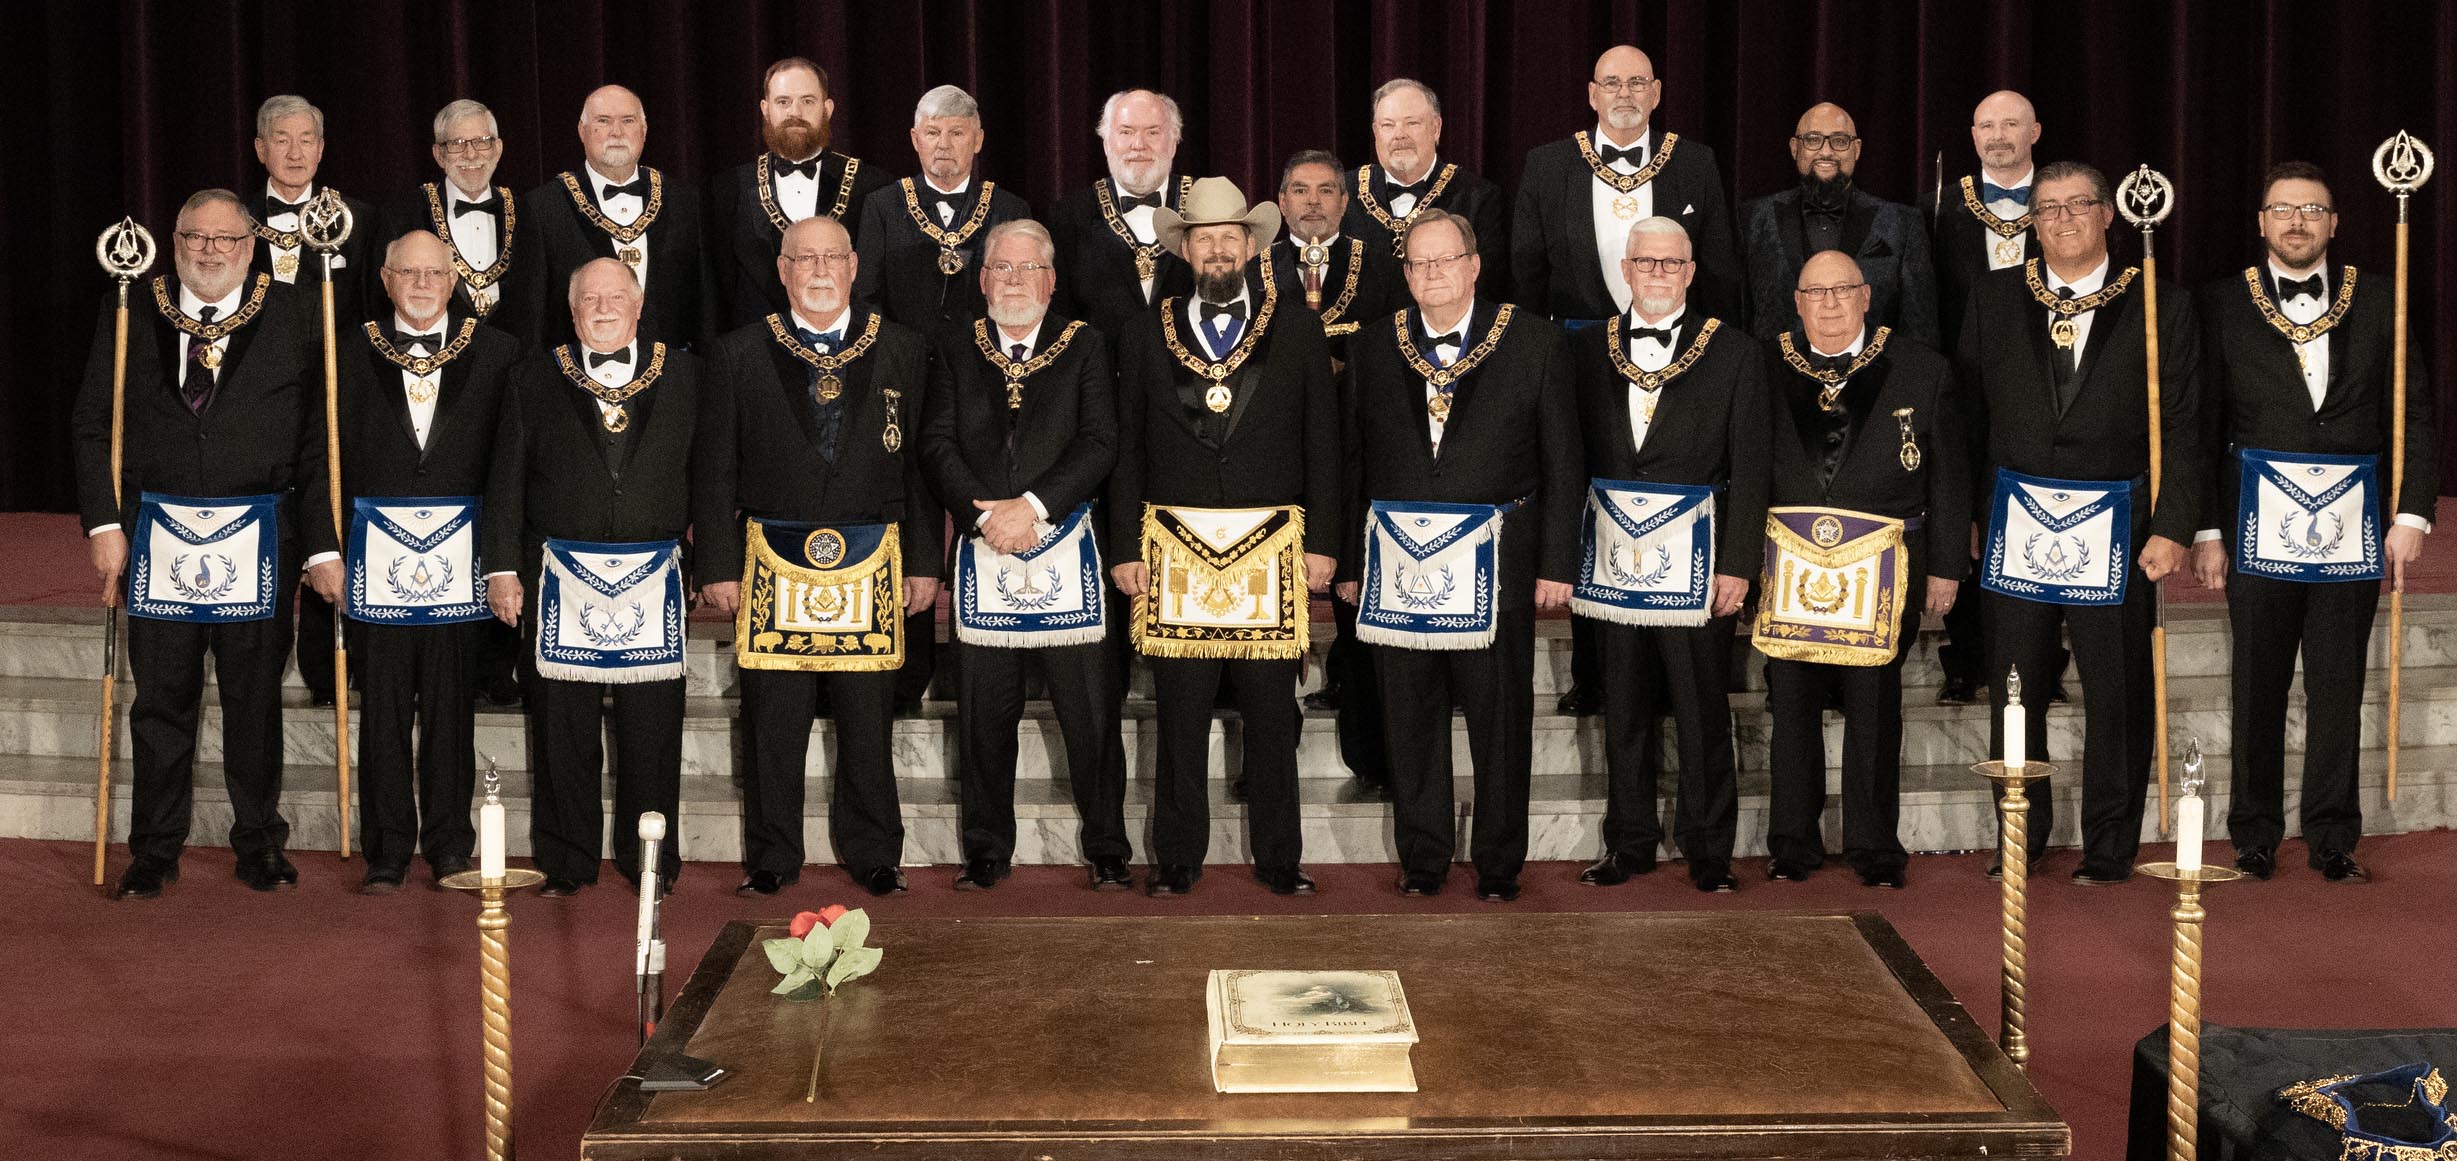 2023 Grand Lodge Officers